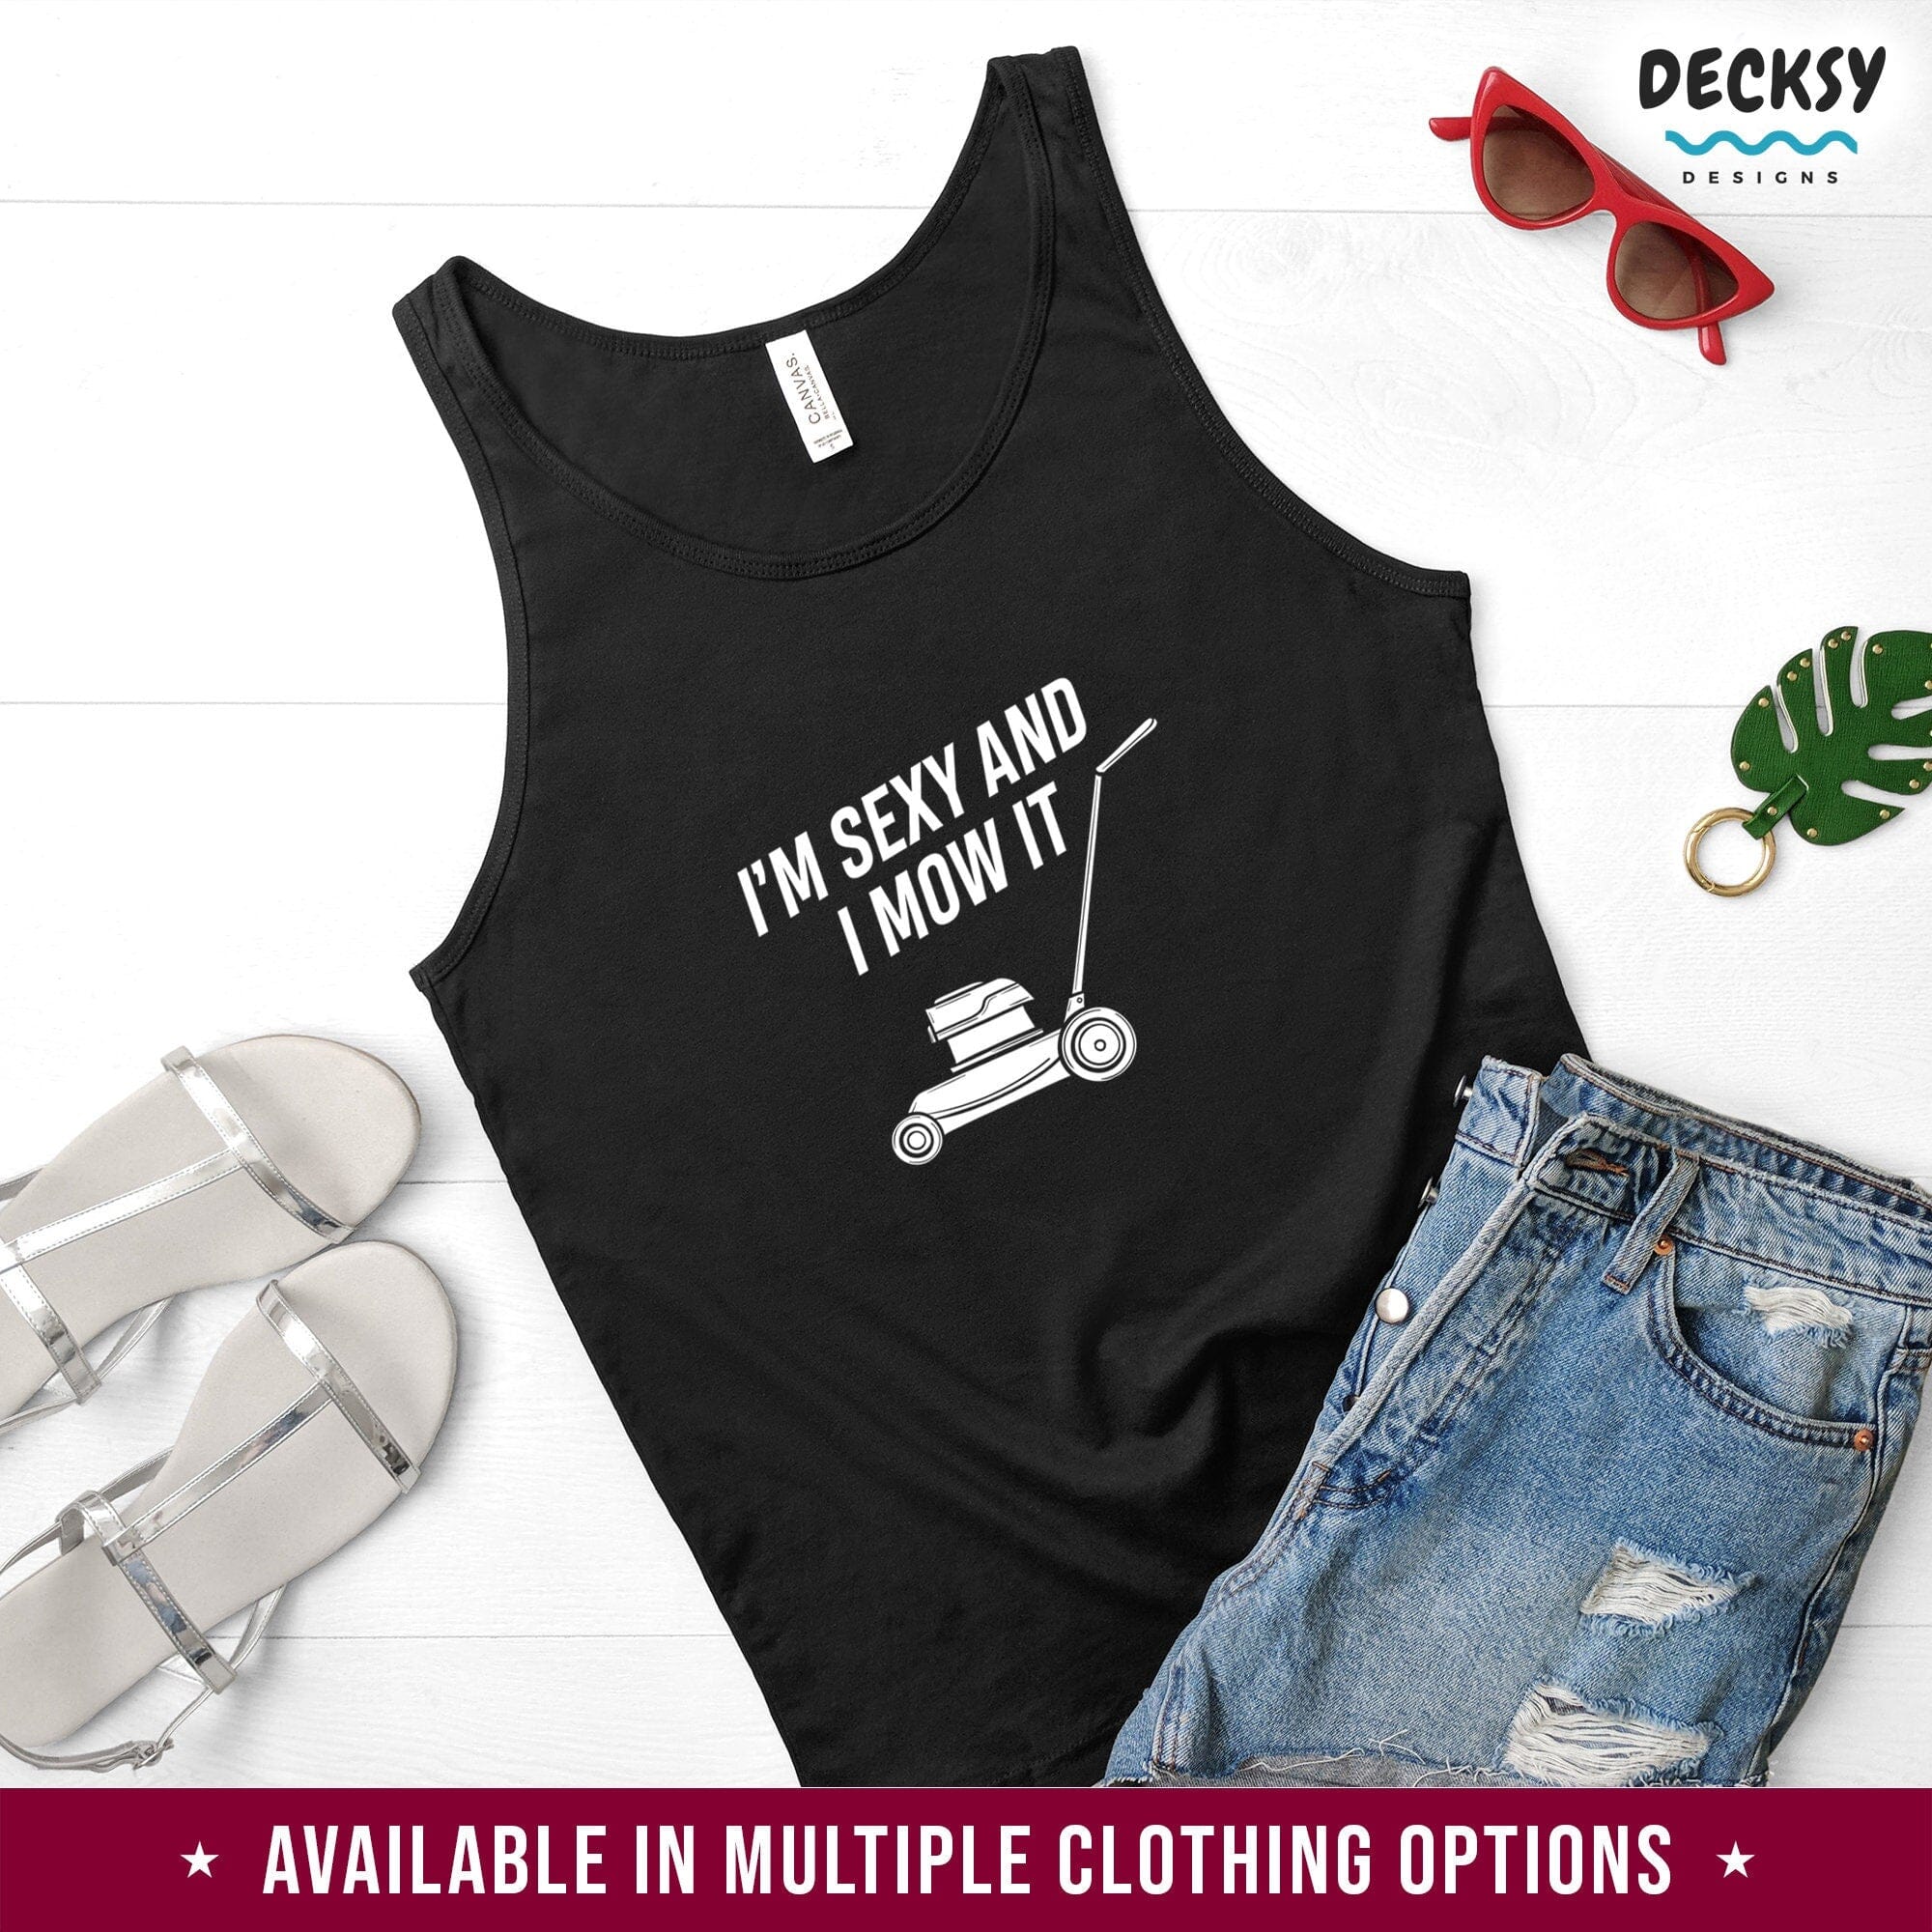 Mens Gardening Shirt, Lawn Mower Gift-Clothing:Gender-Neutral Adult Clothing:Tops & Tees:T-shirts:Graphic Tees-DecksyDesigns